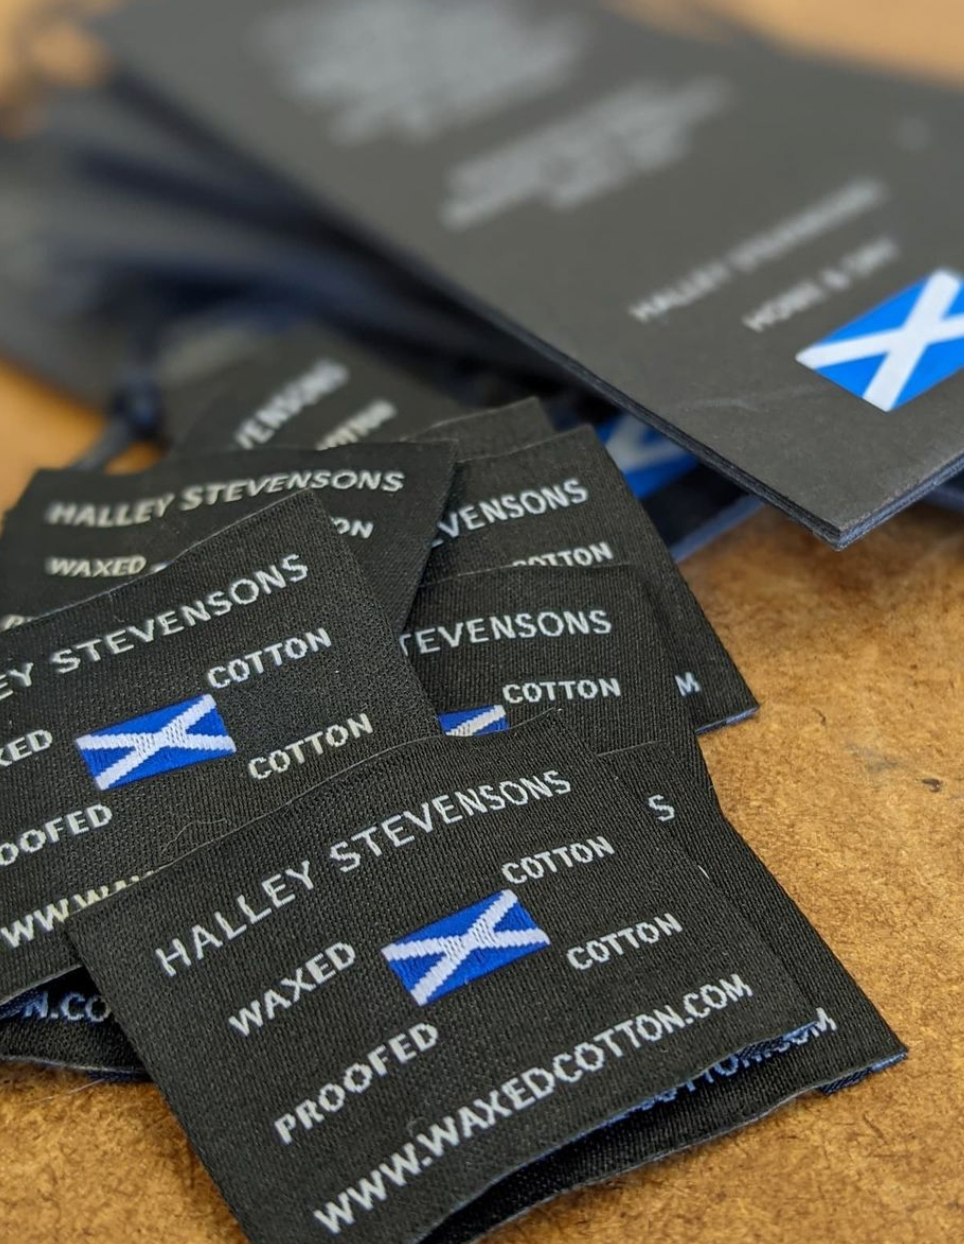 Image shows small authenticity labels of Halley Stevensons, Scotland 